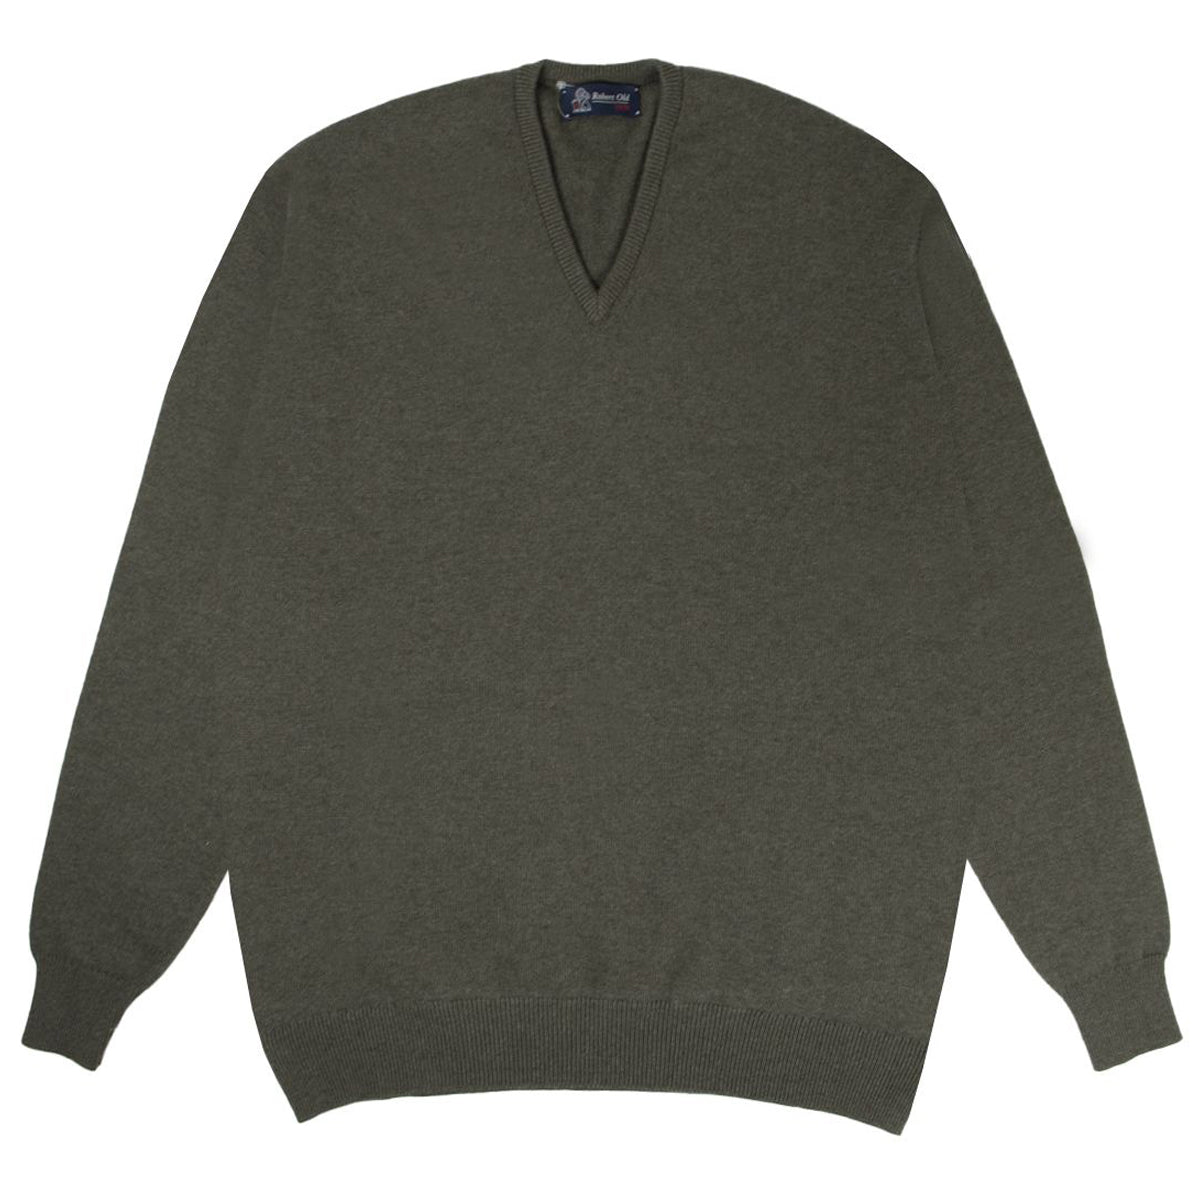 Loden Mix Tobermorey 4ply V-Neck Cashmere Sweater  Robert Old   